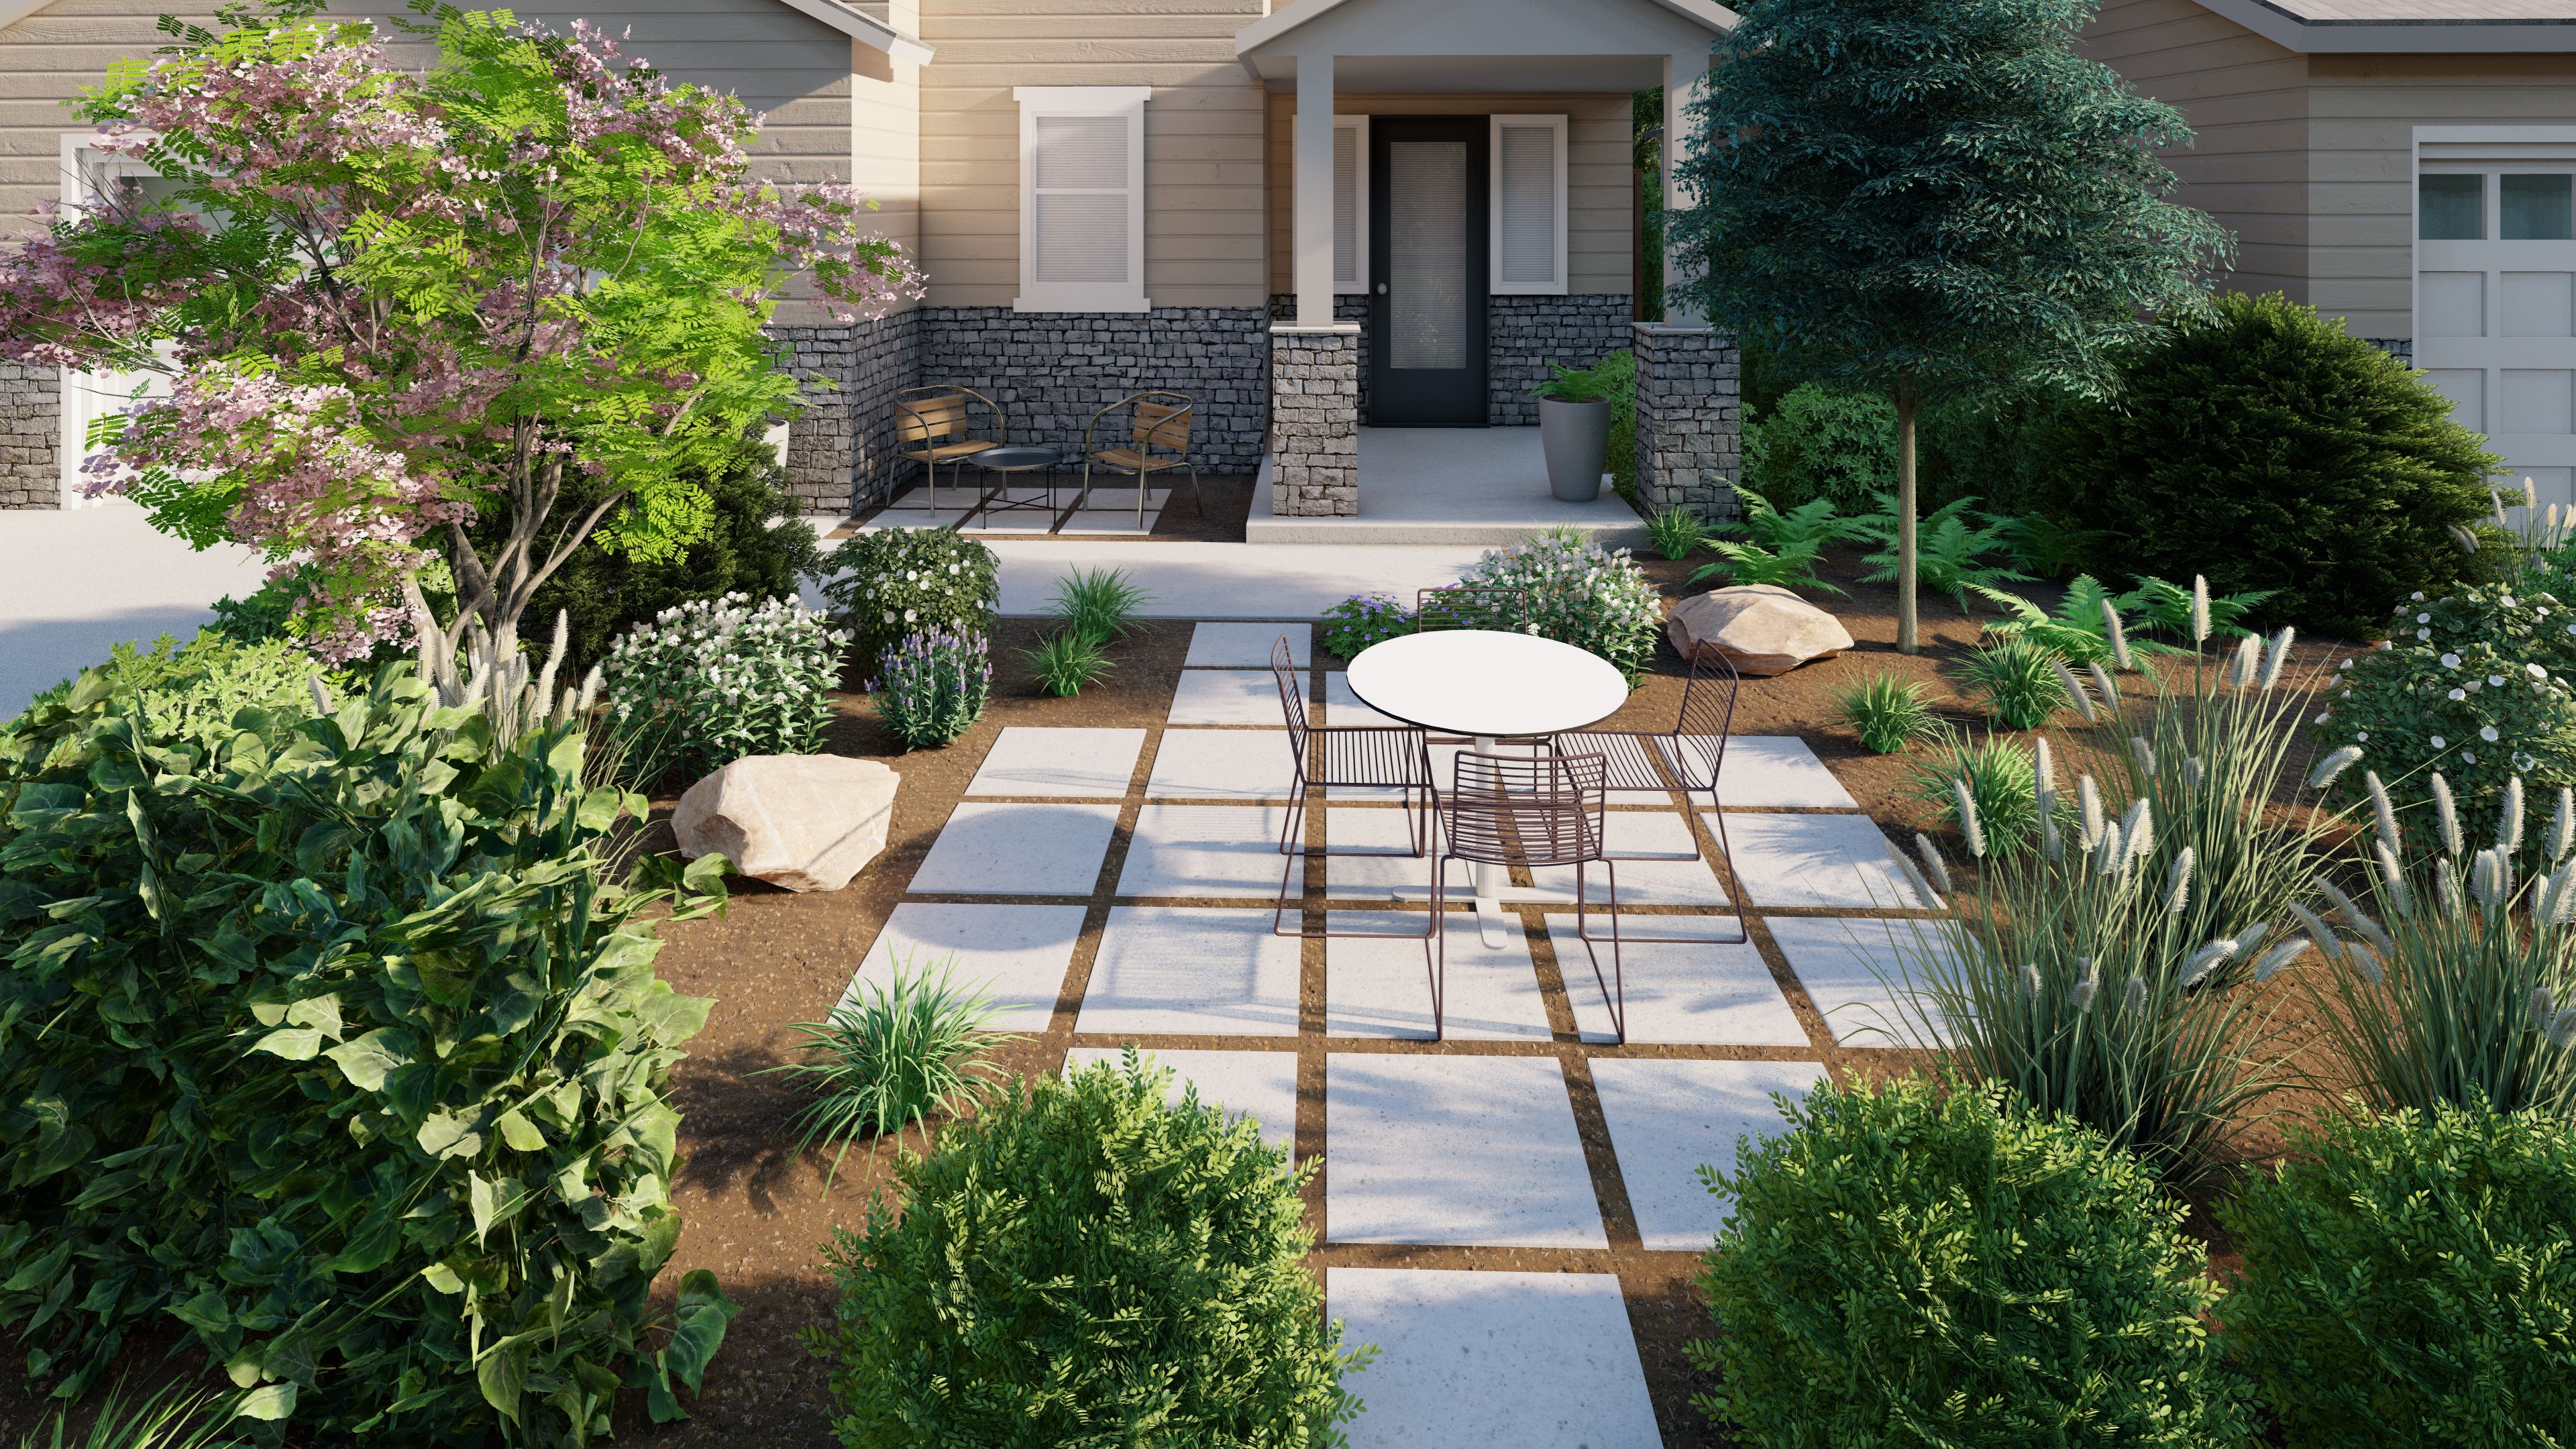 functional front yards with seating areas and garden beds